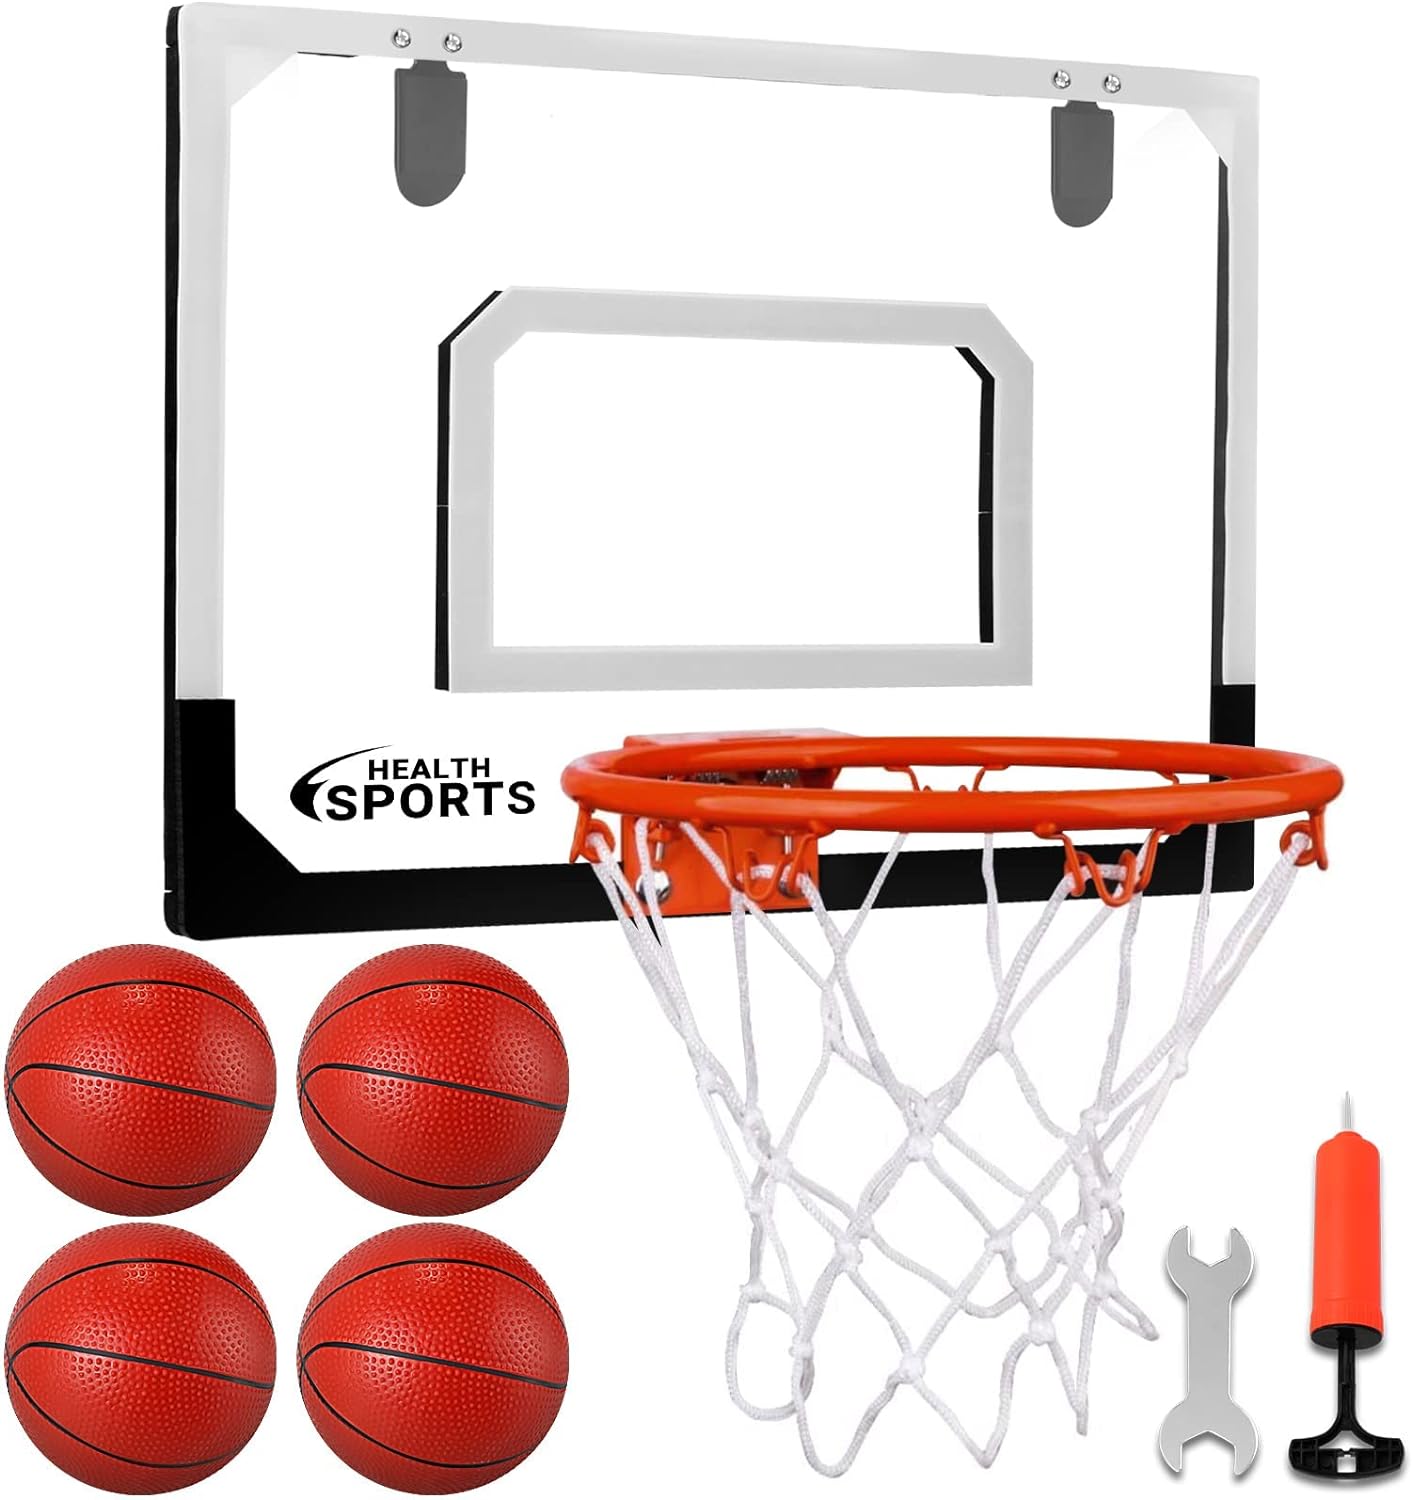 AOKESI Indoor Mini Basketball Hoop Set for Kids - 17 x 12.5 Door Hoops Room&Wall Mounted with Complete Accessories Game Toys Balls Gifts Boys Teens